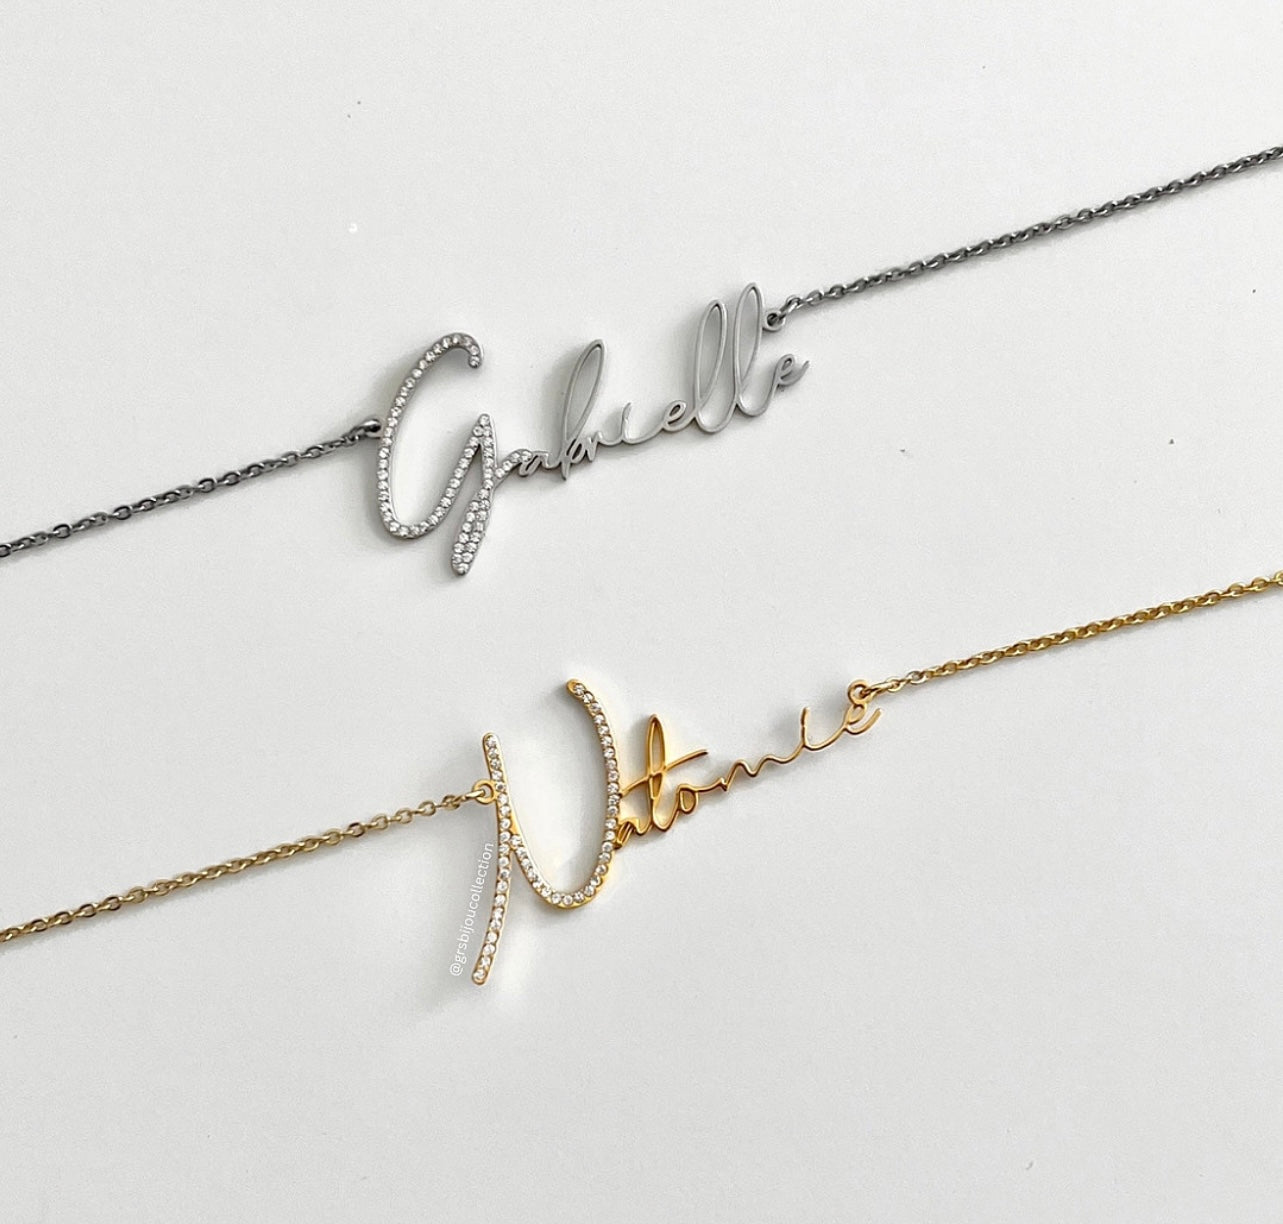 Luxe Name Necklace